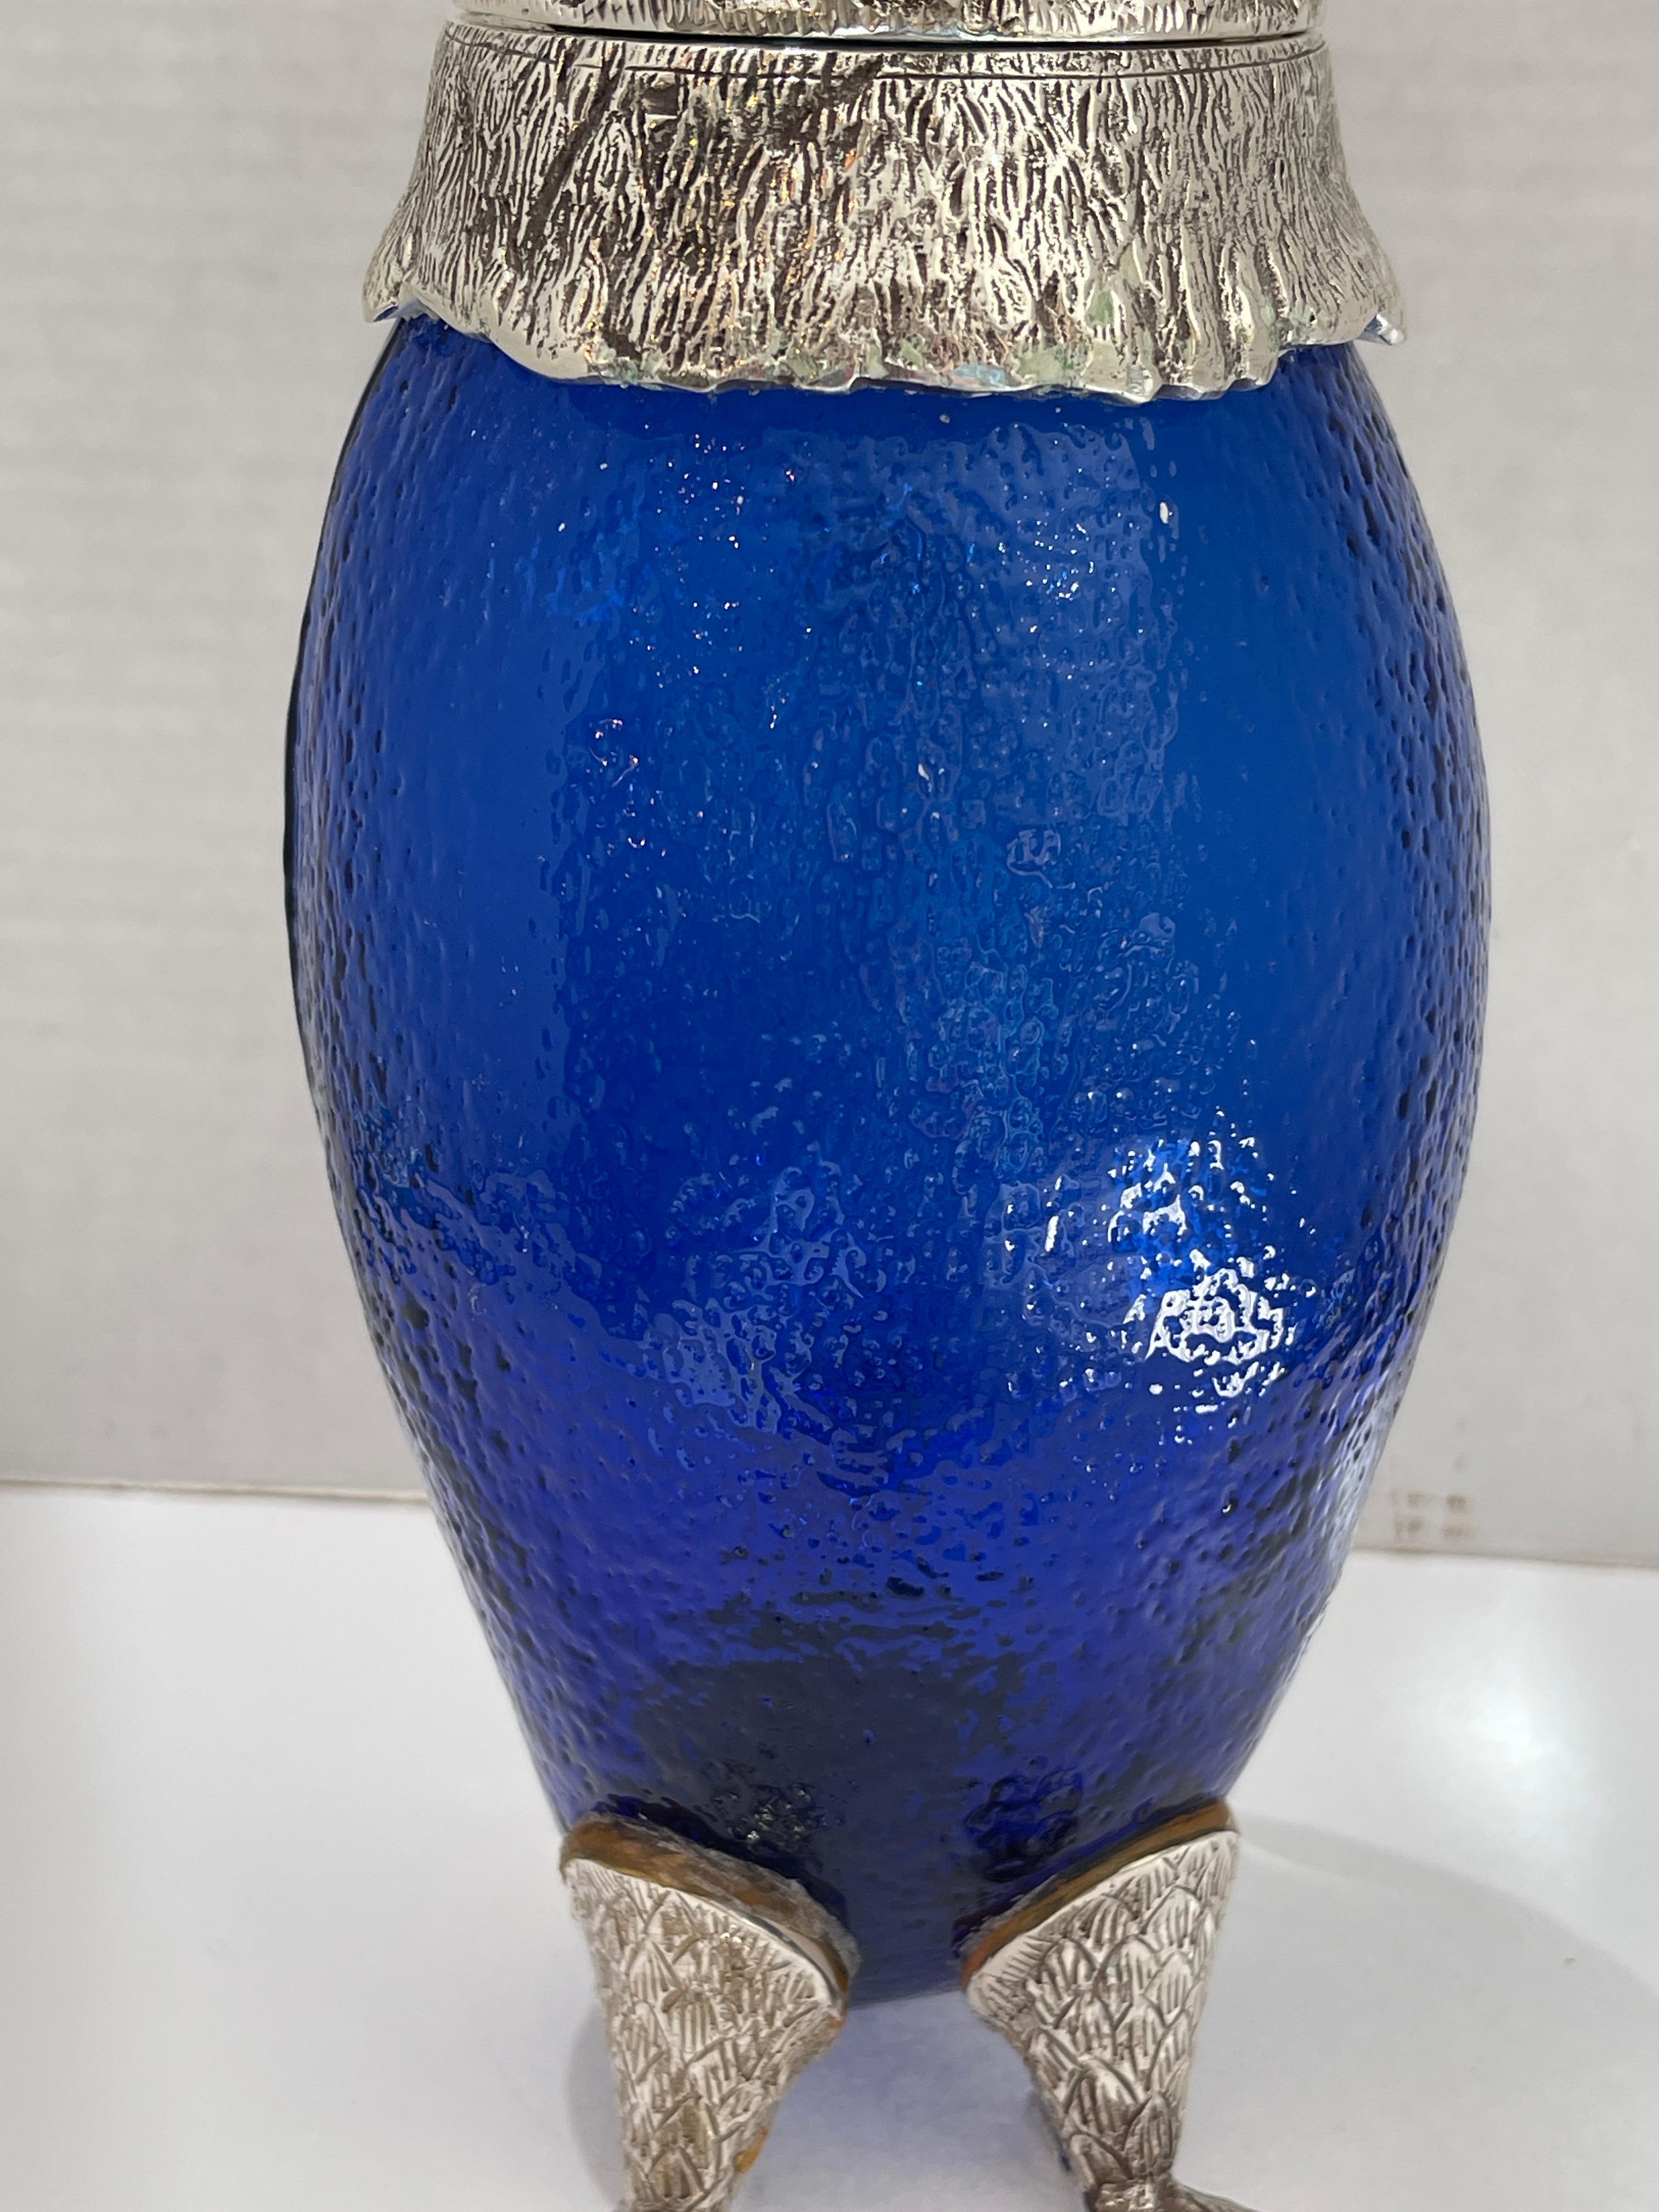 Novelty Silver Plate and Cobalt Blue Glass Owl Claret Jug Decanter 20Th C. For Sale 3